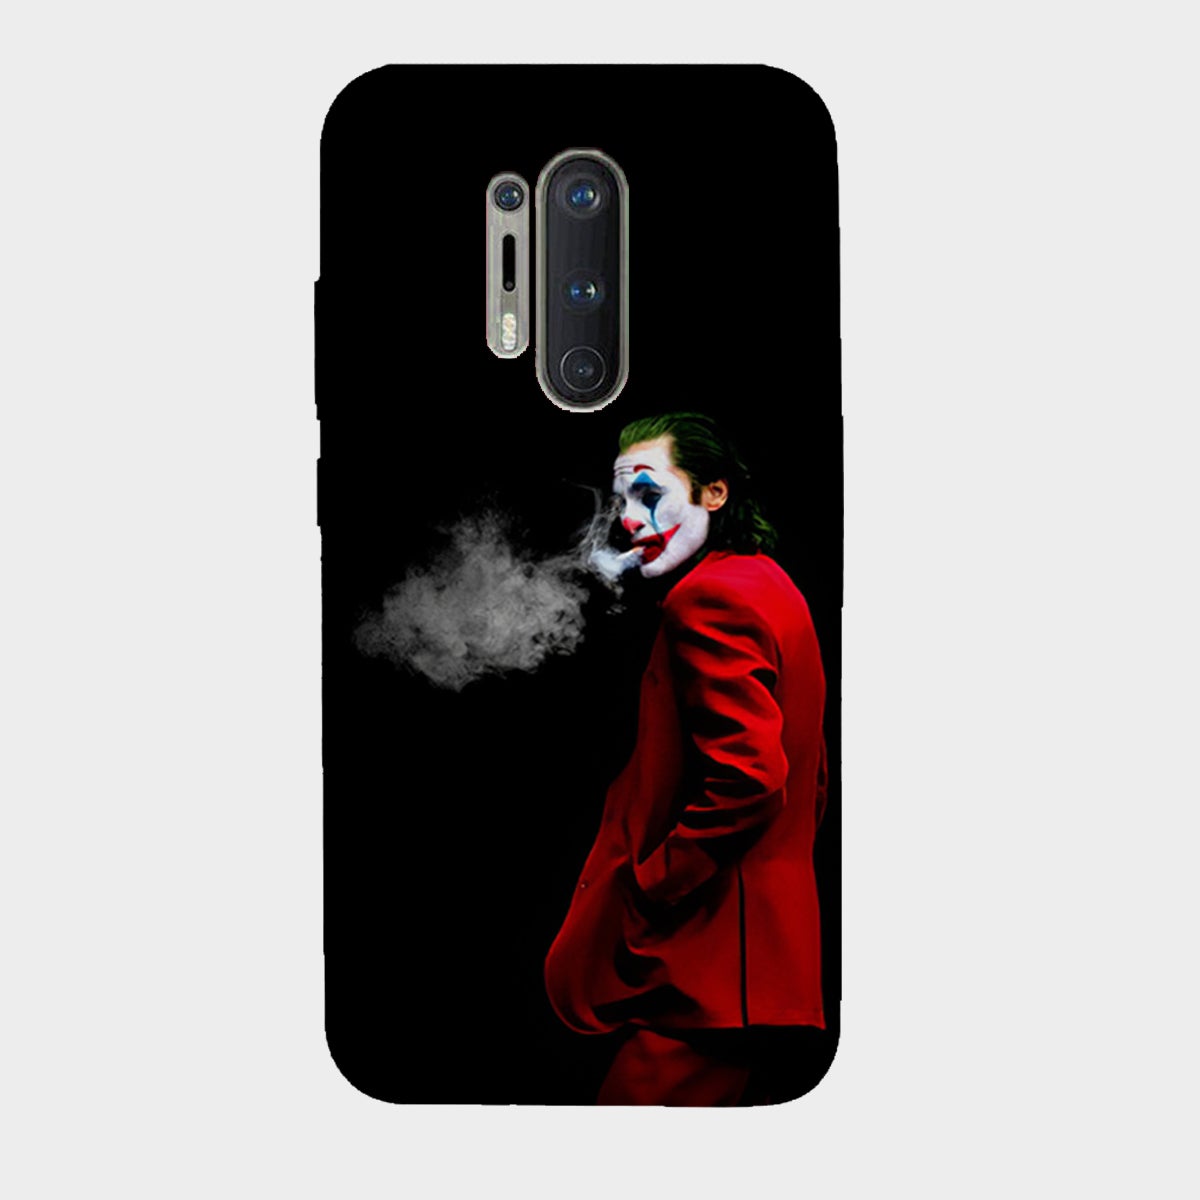 The Joker - Red Suit - Mobile Phone Cover - Hard Case - OnePlus